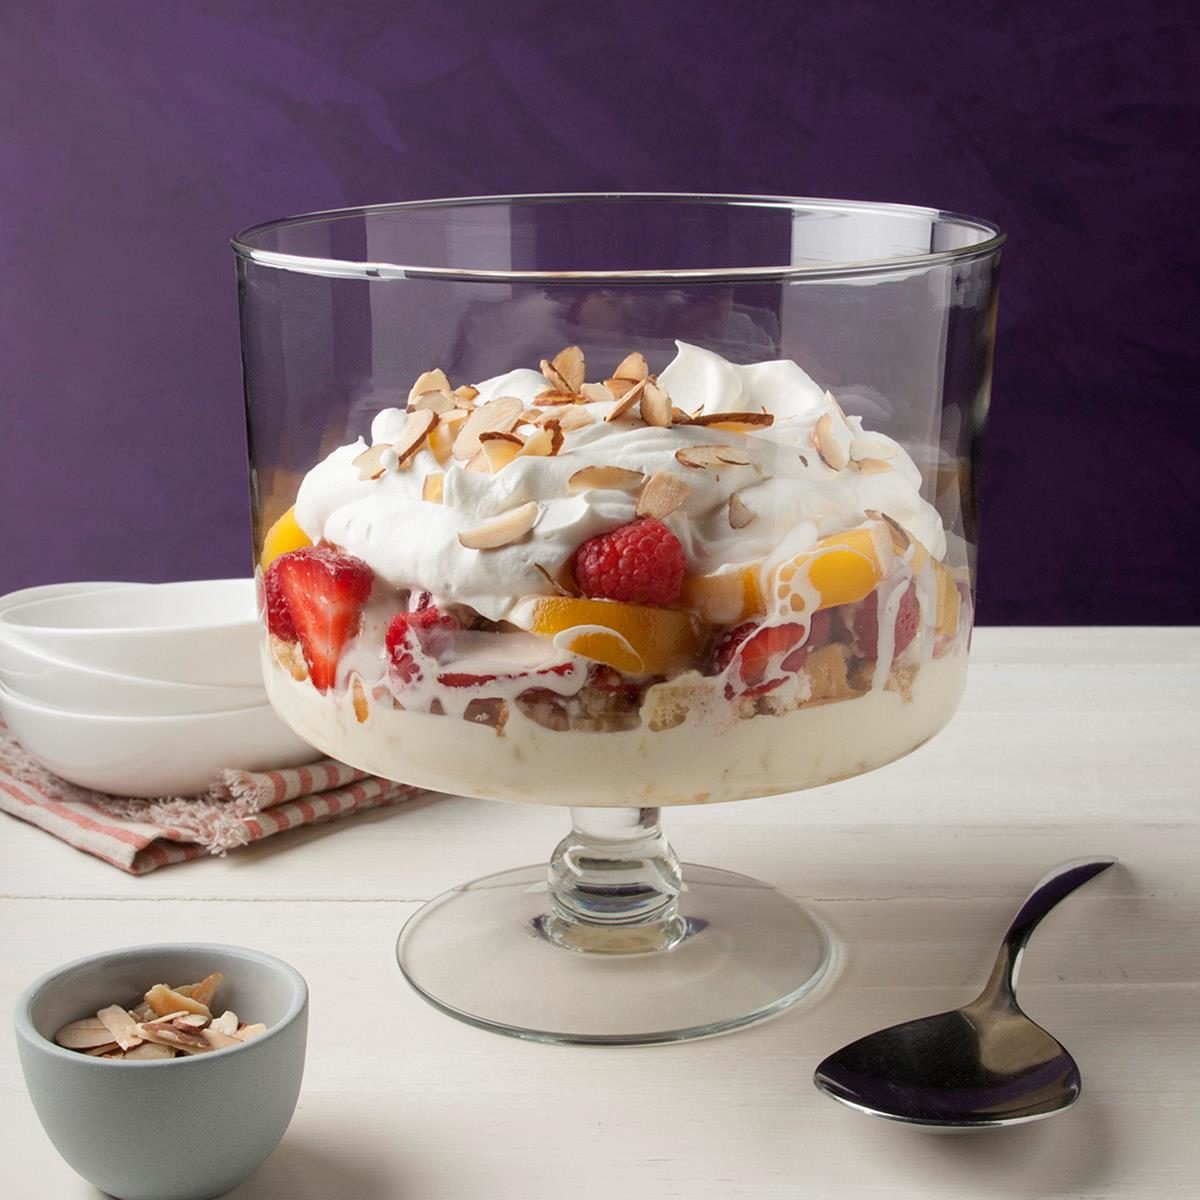 Old English Trifle Exps Ft19 48552 F 0924 1 3